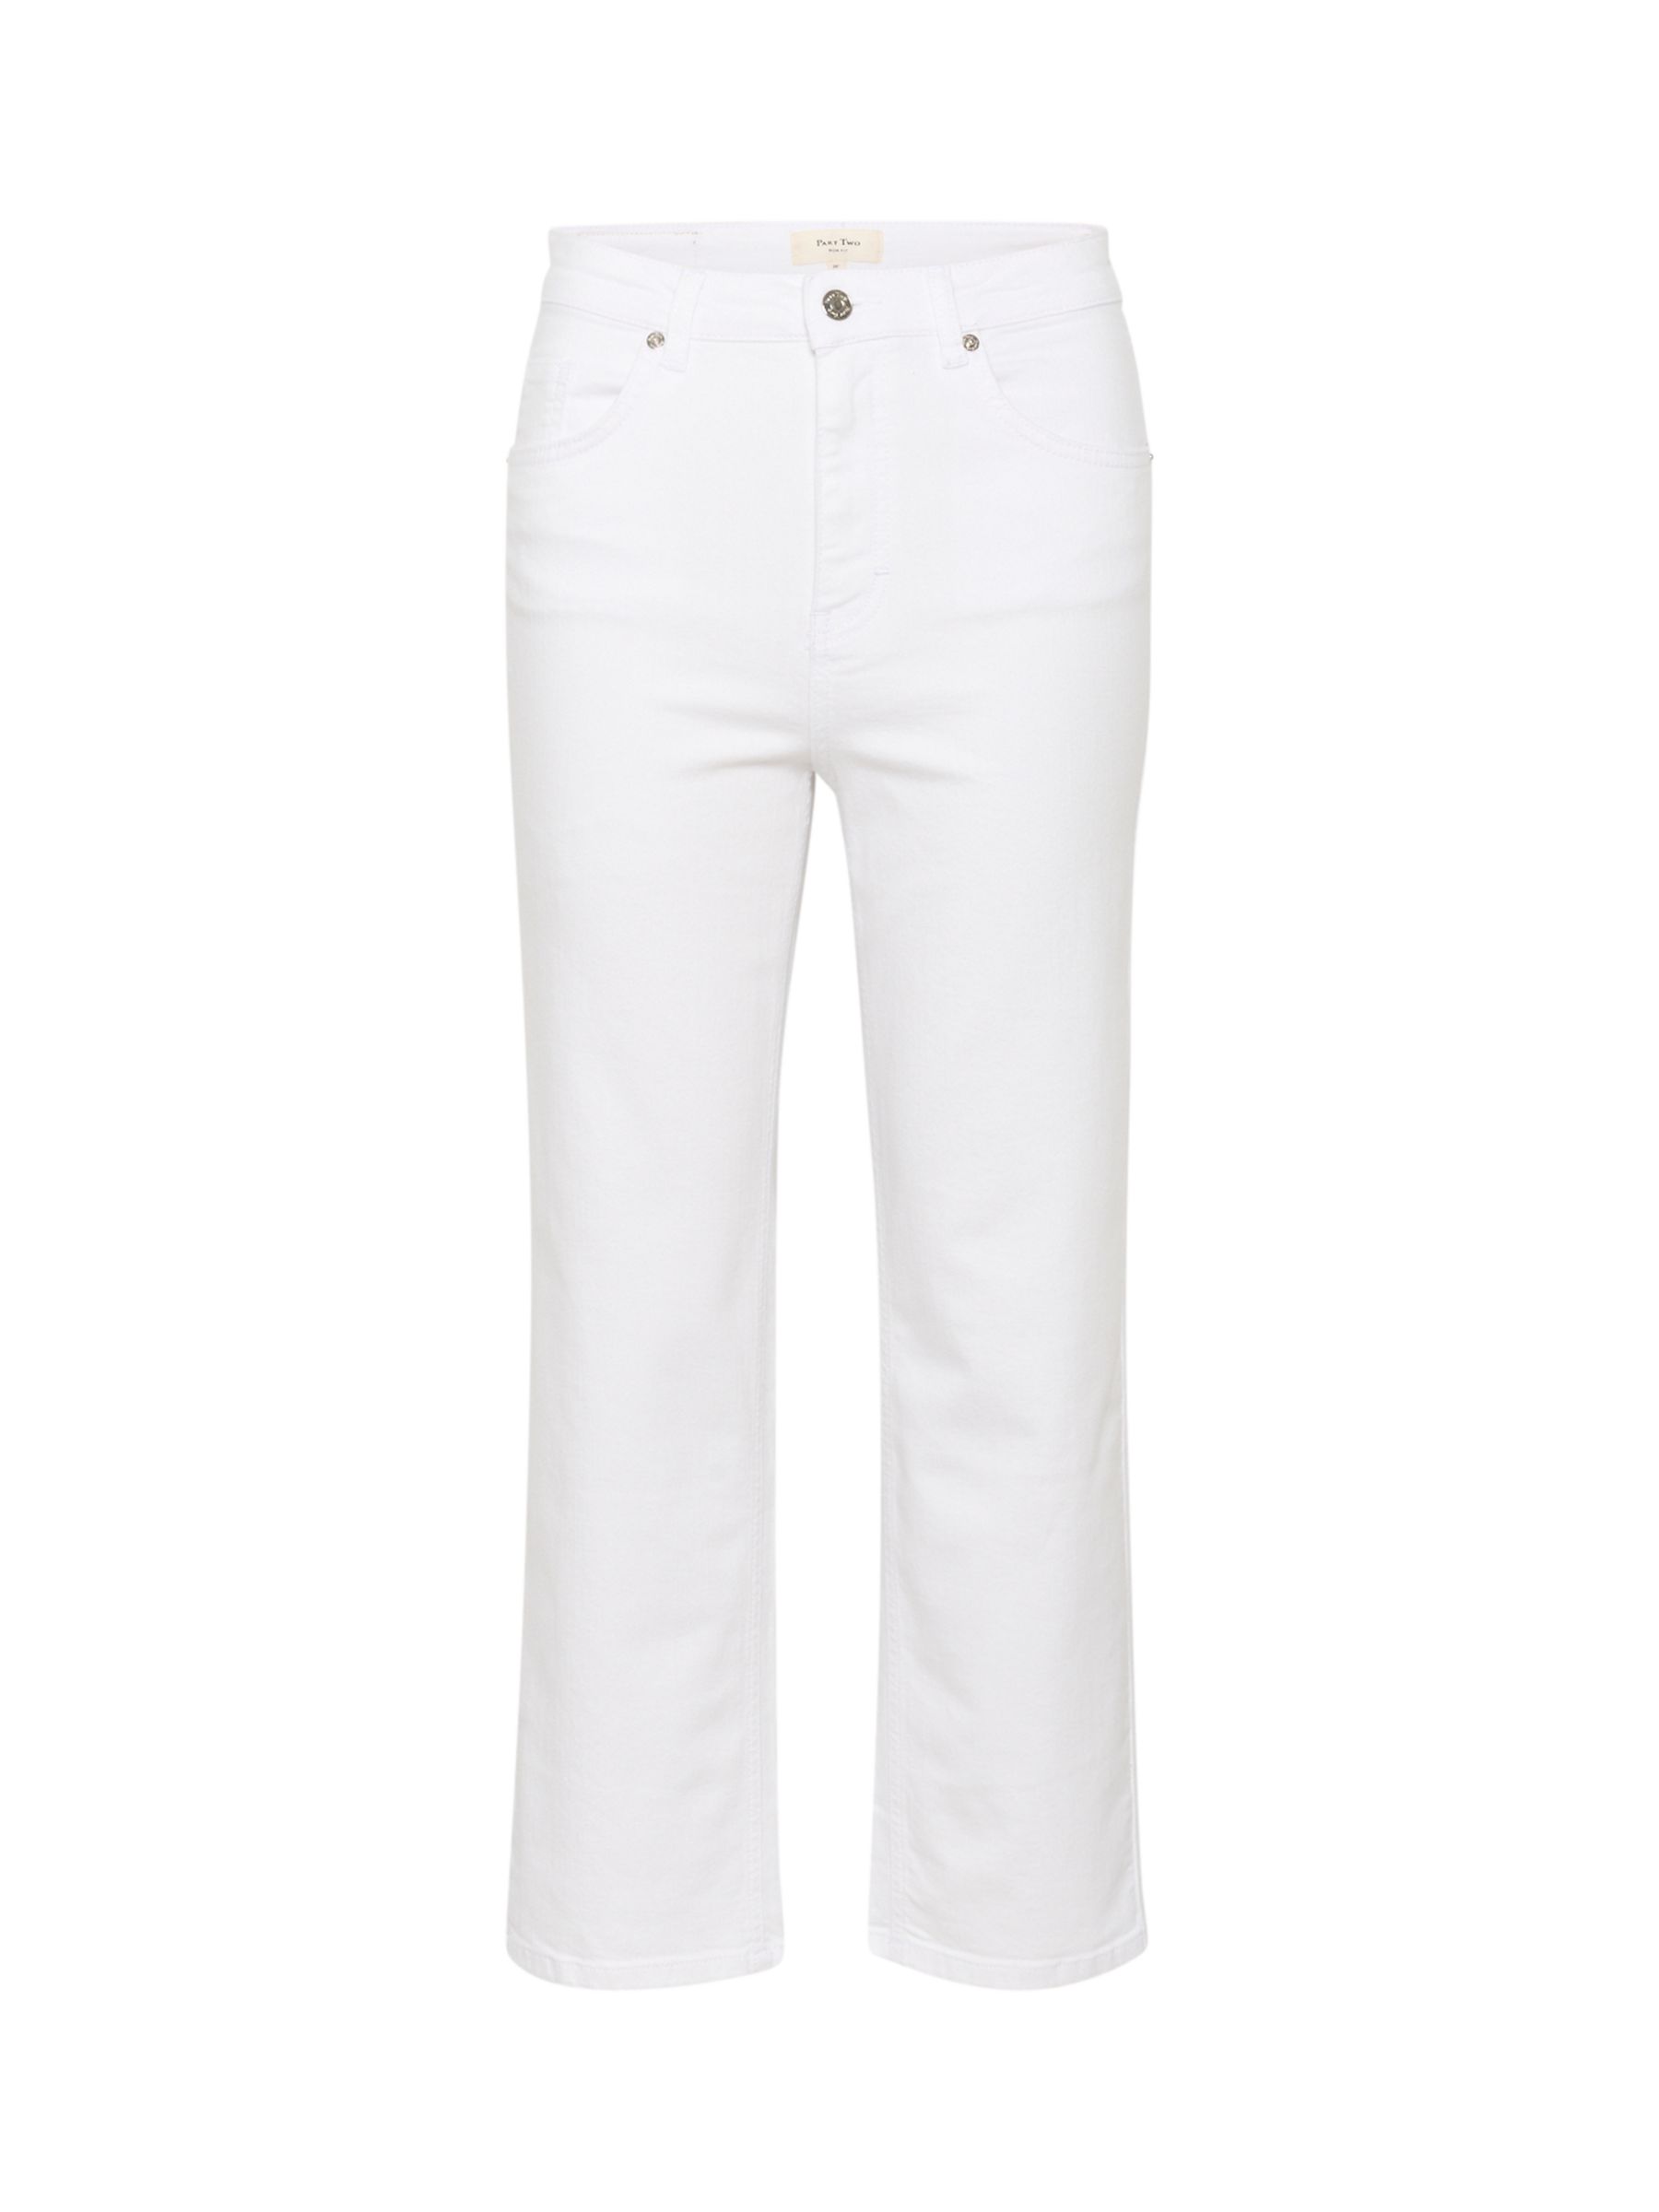 Part Two Judy Straight Legs High Waist Jeans, Bright White, 28R